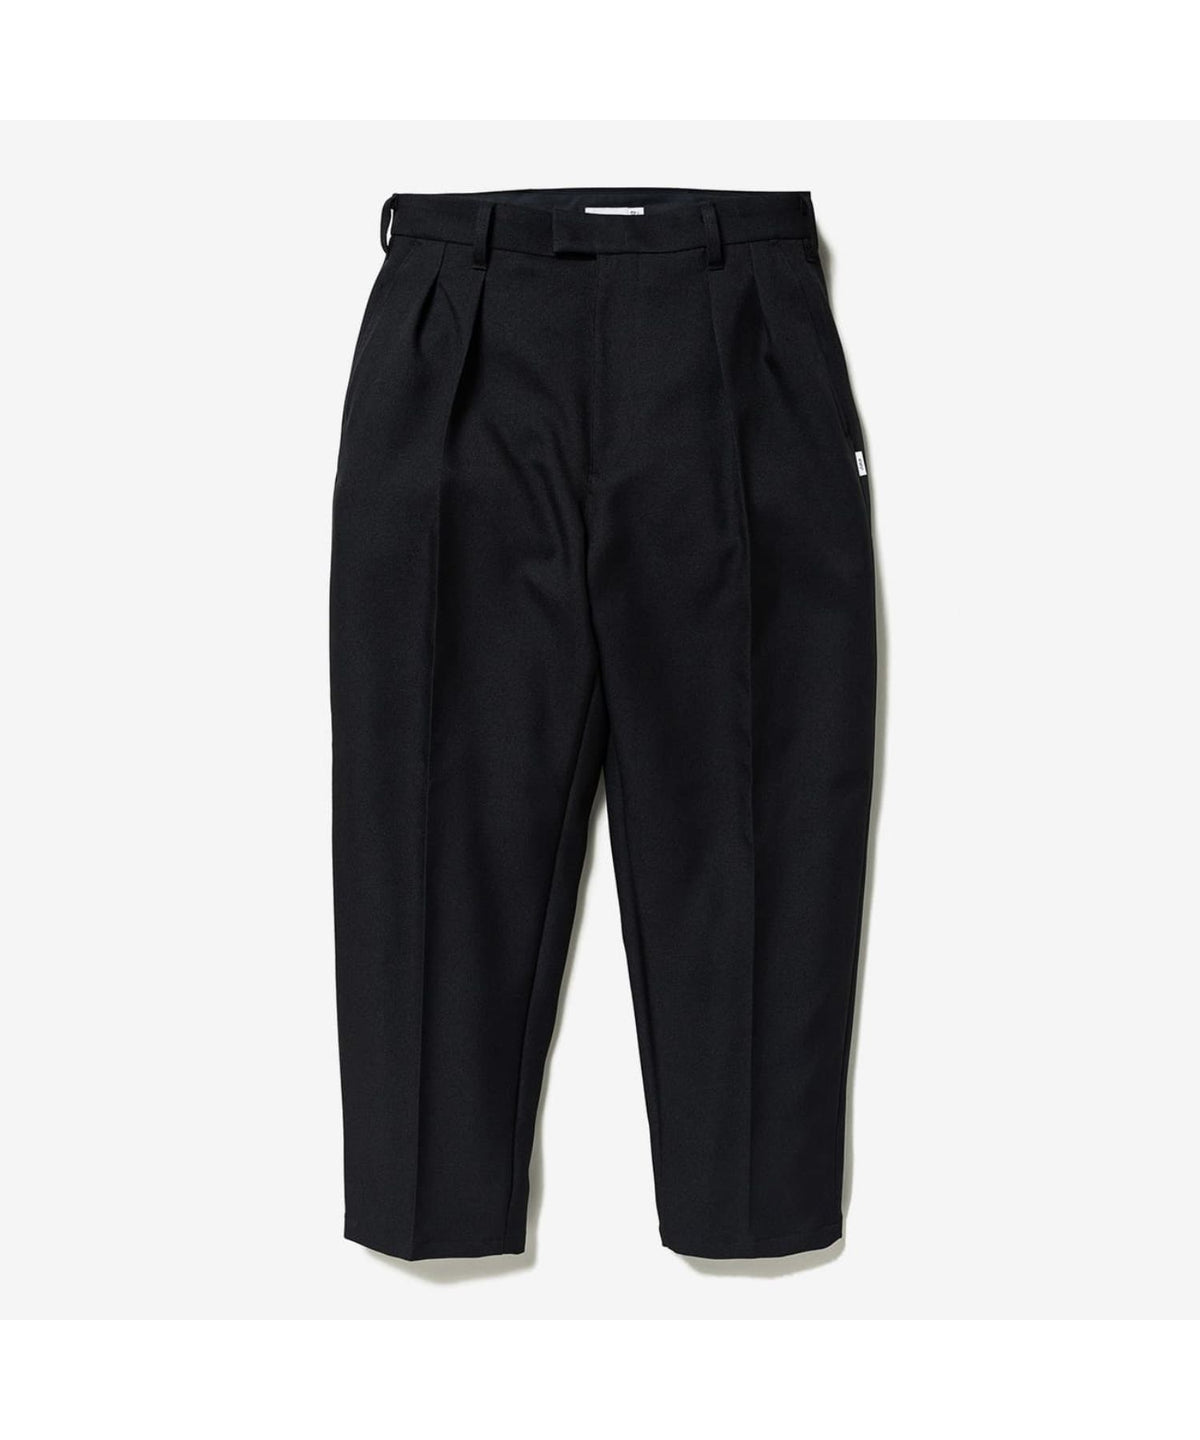 TRDT1801 / TROUSERS / POLY. TWILL